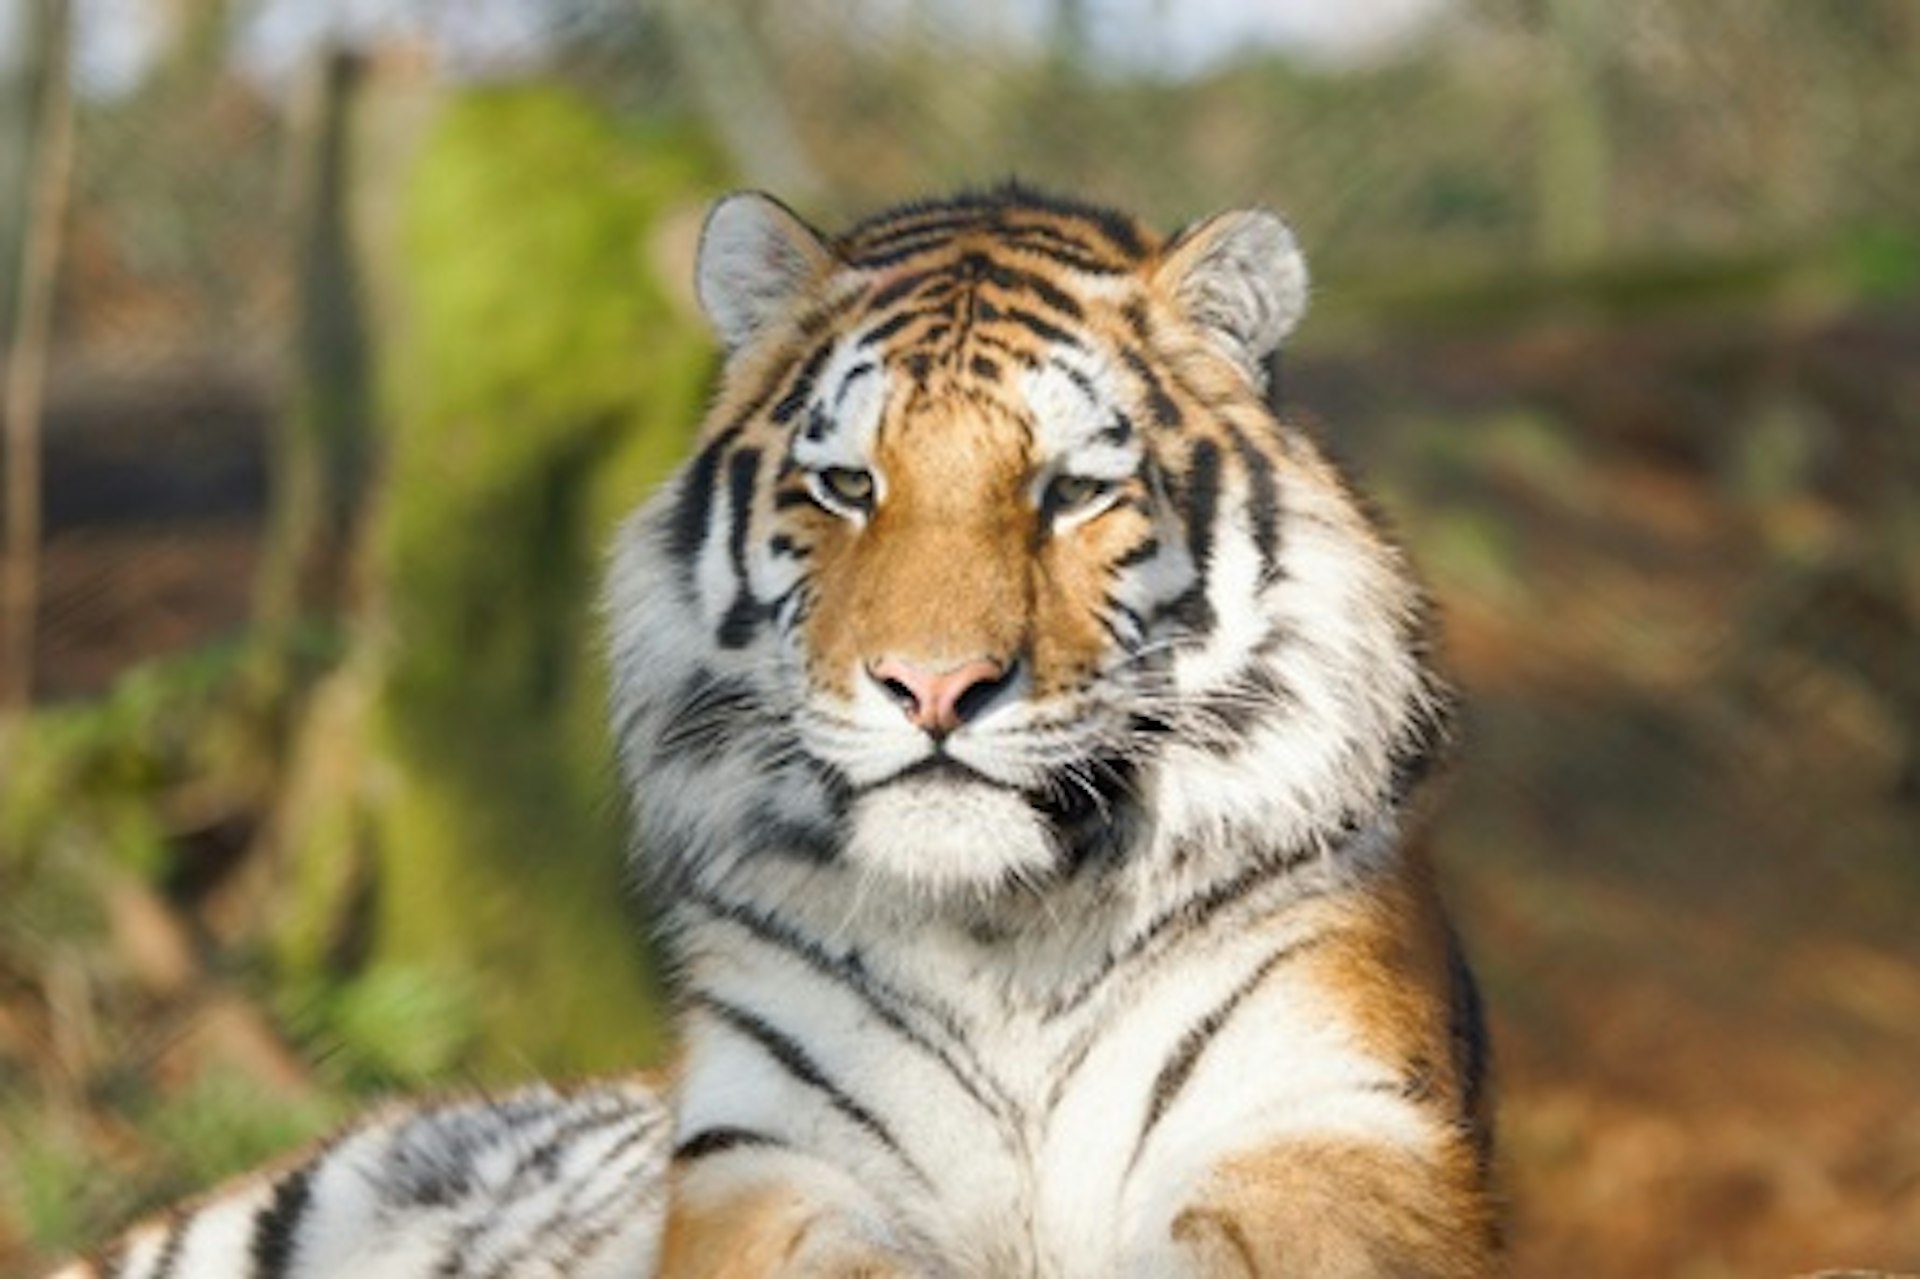 Tiger Encounter for Two at Dartmoor Zoo 1